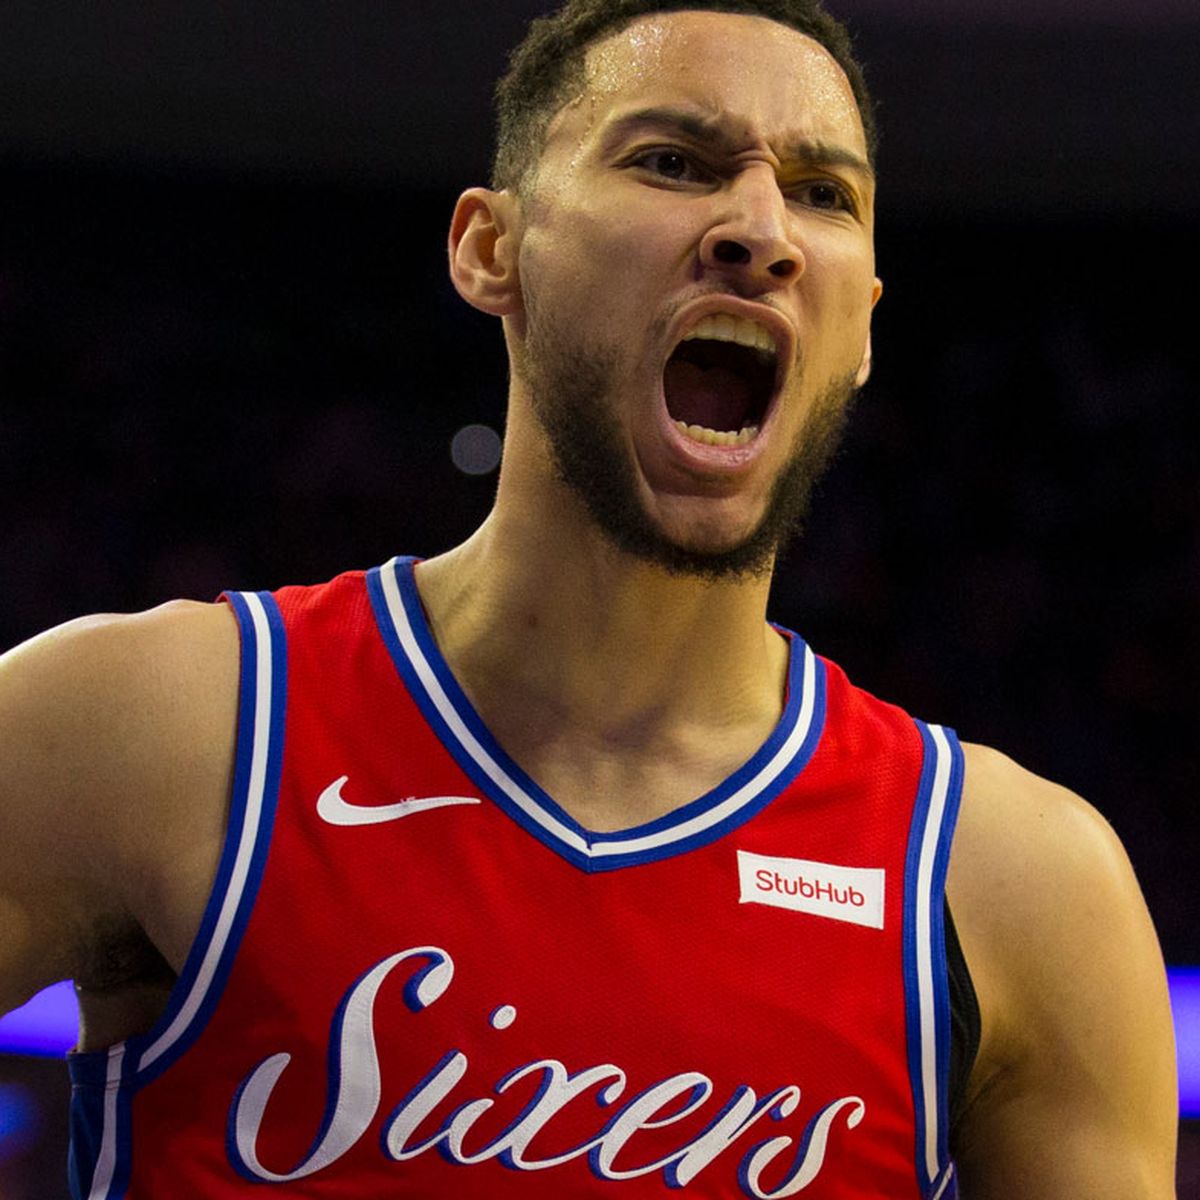 Ben Simmons Shows Off His 3-Point Shot In Practice 